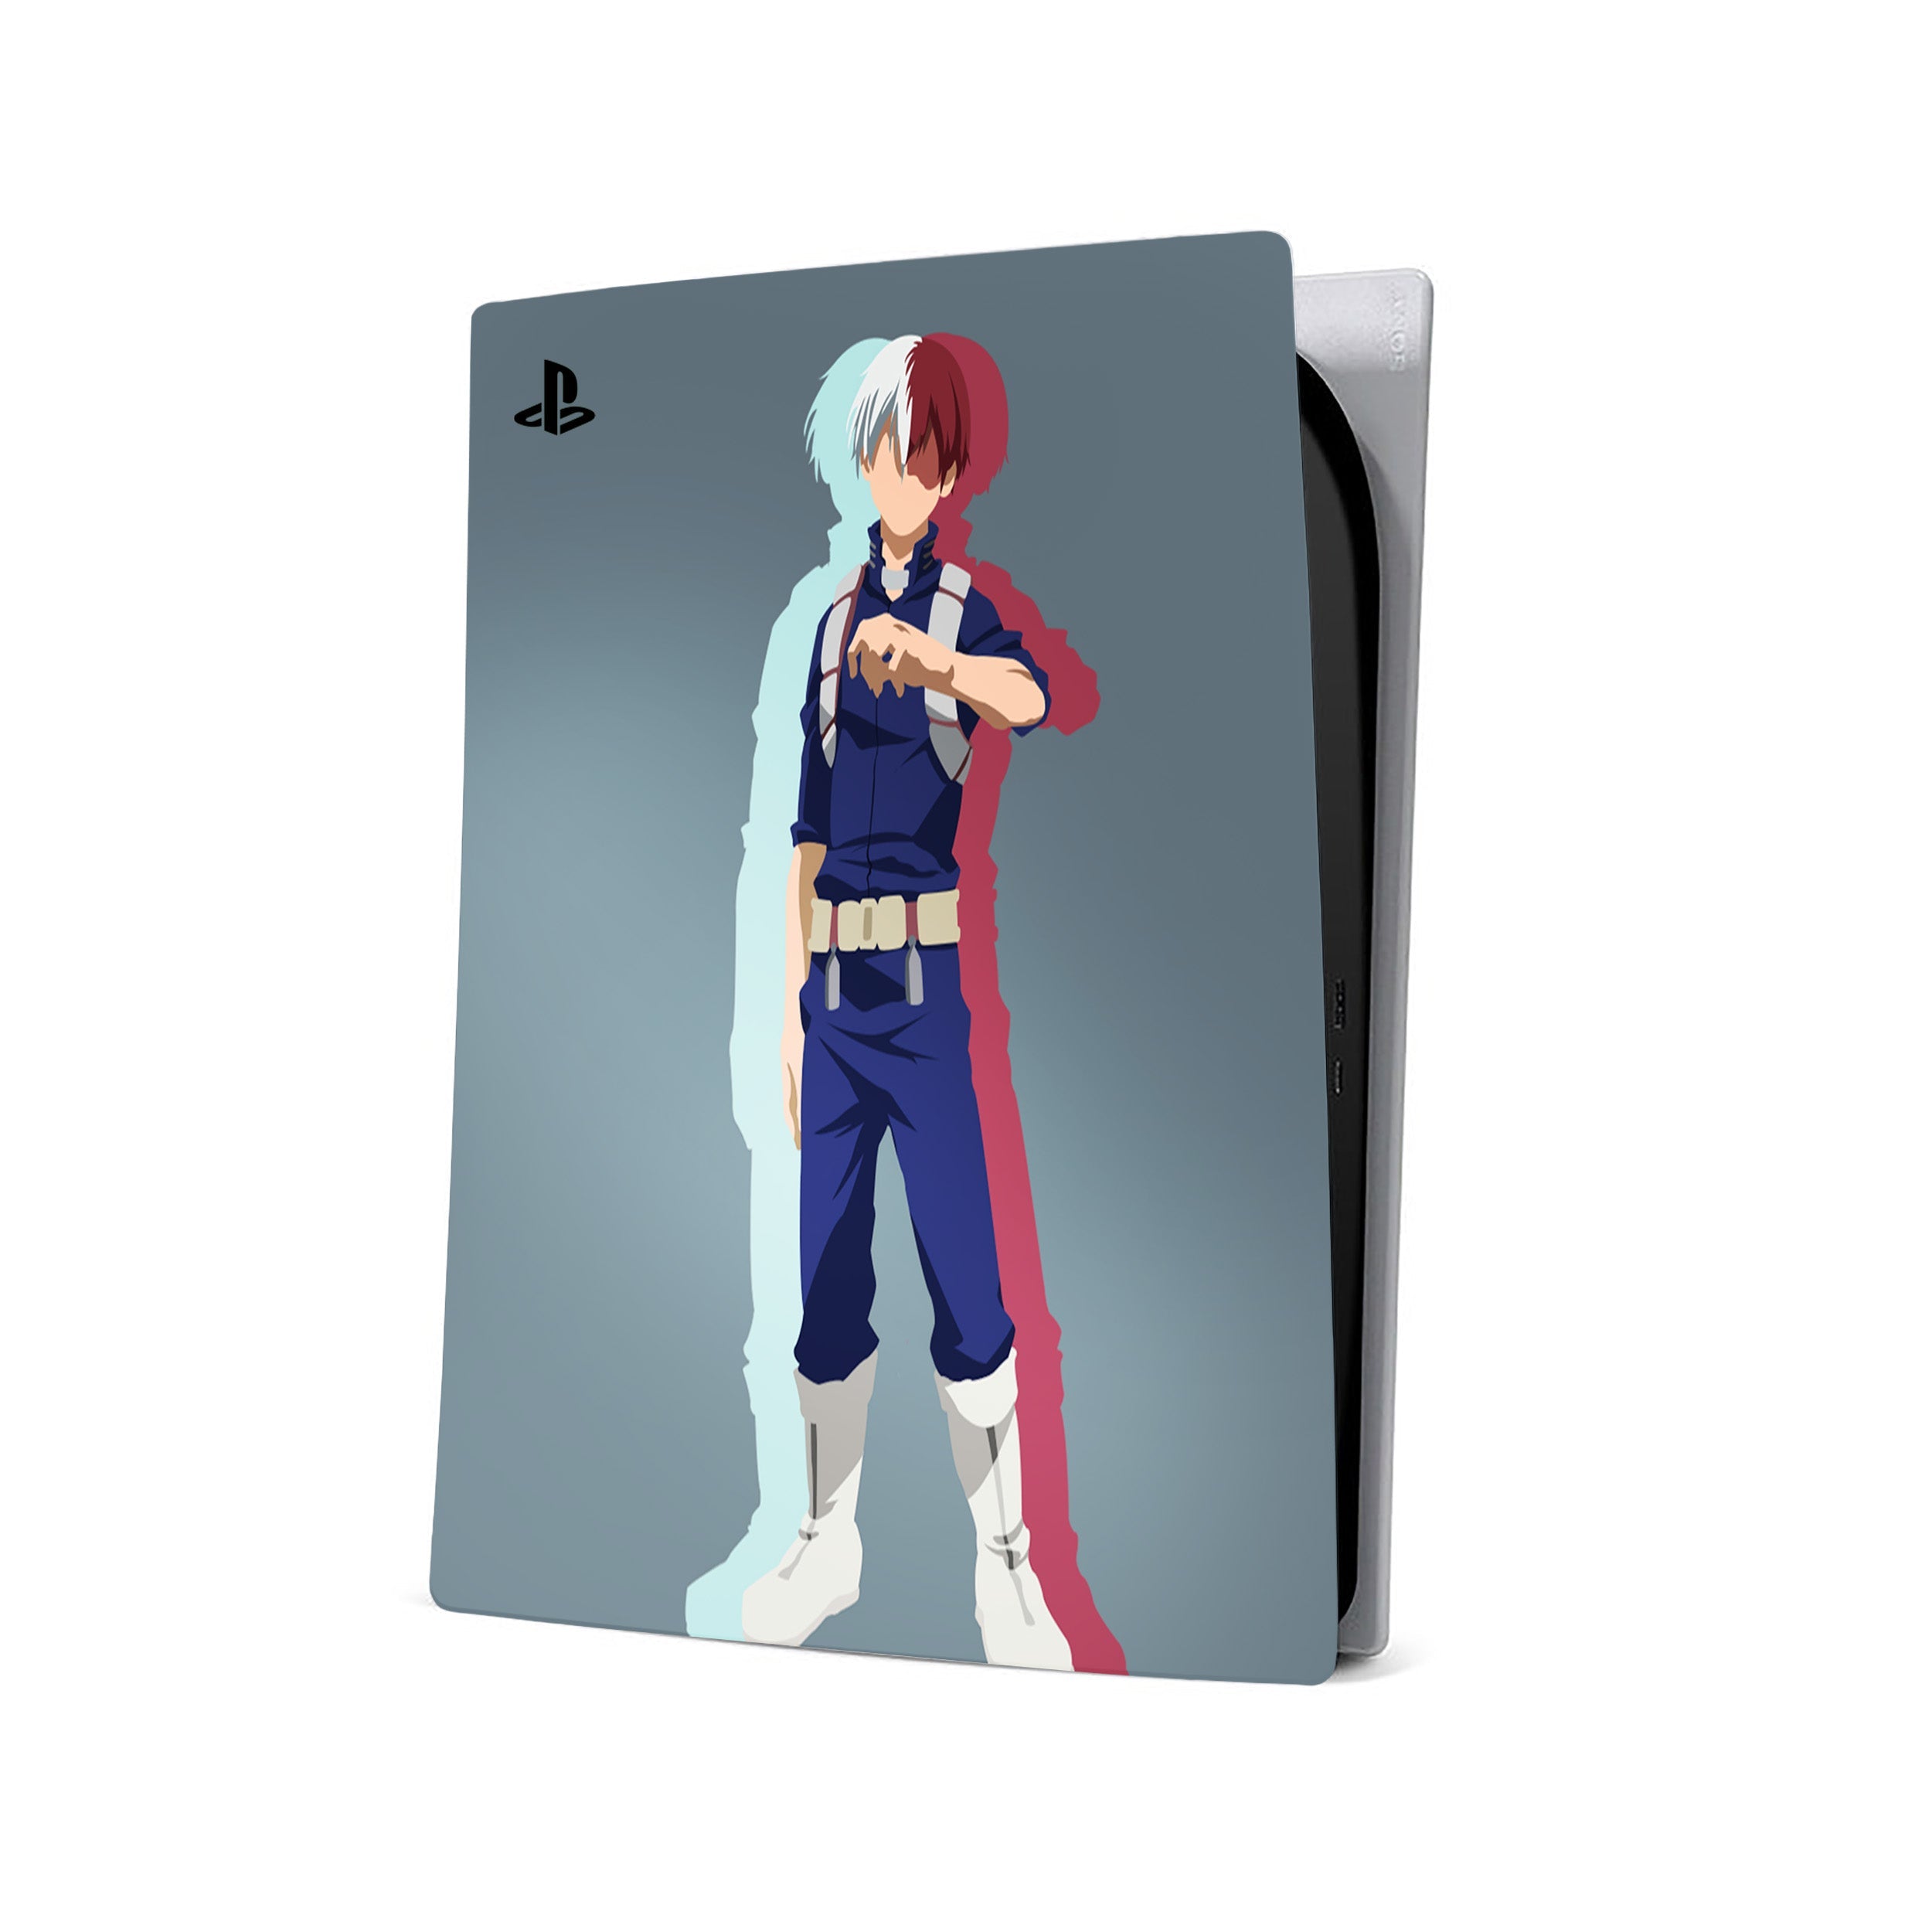 A video game skin featuring a My Hero Academia Shoto Todoroki design for the PS5.